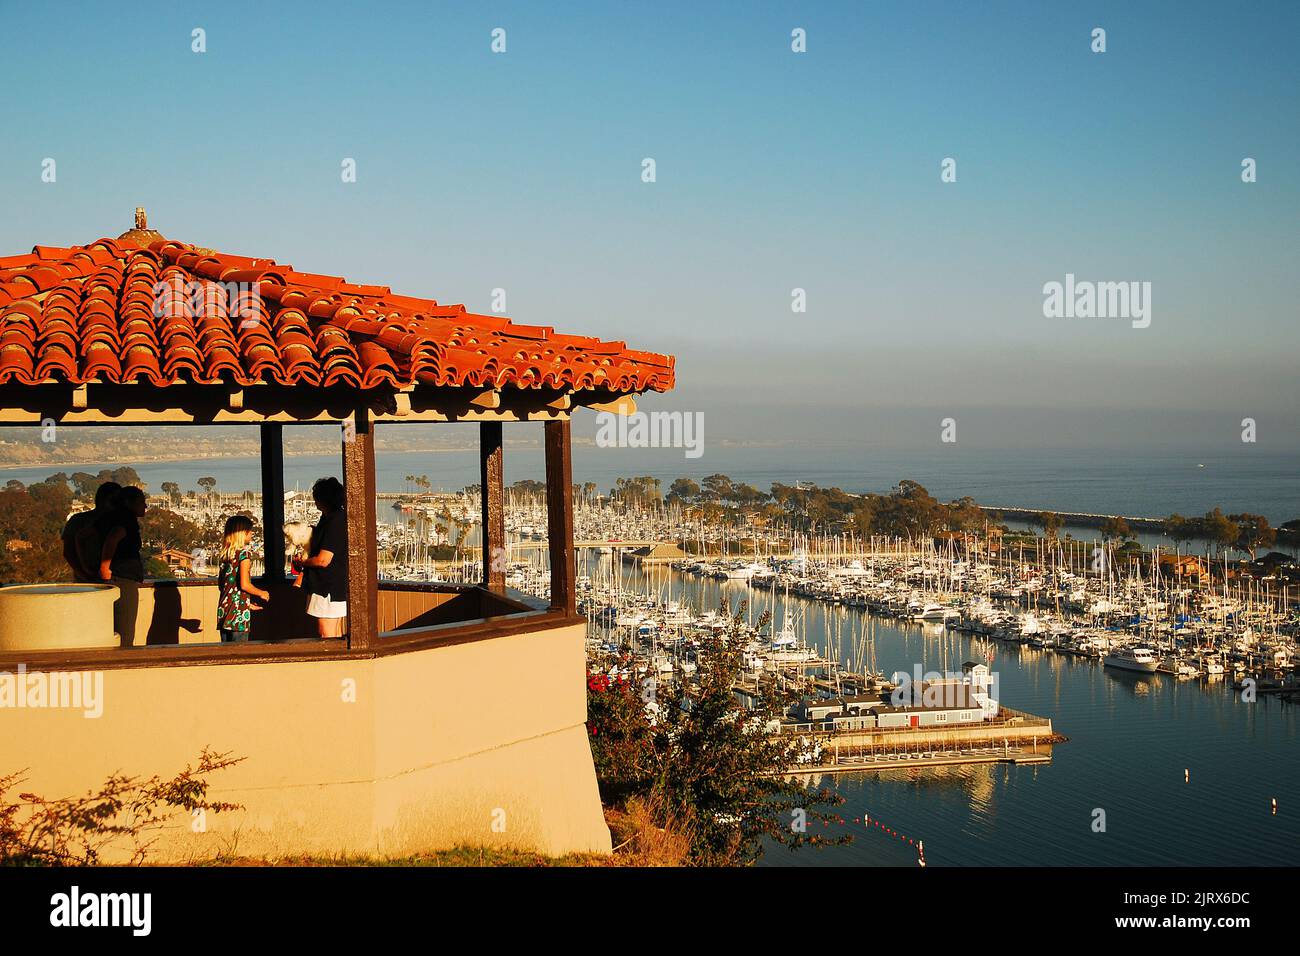 A red tiled gazebo perched high on a cliff gives a wonderful view of the harbor at Dana Point Stock Photo